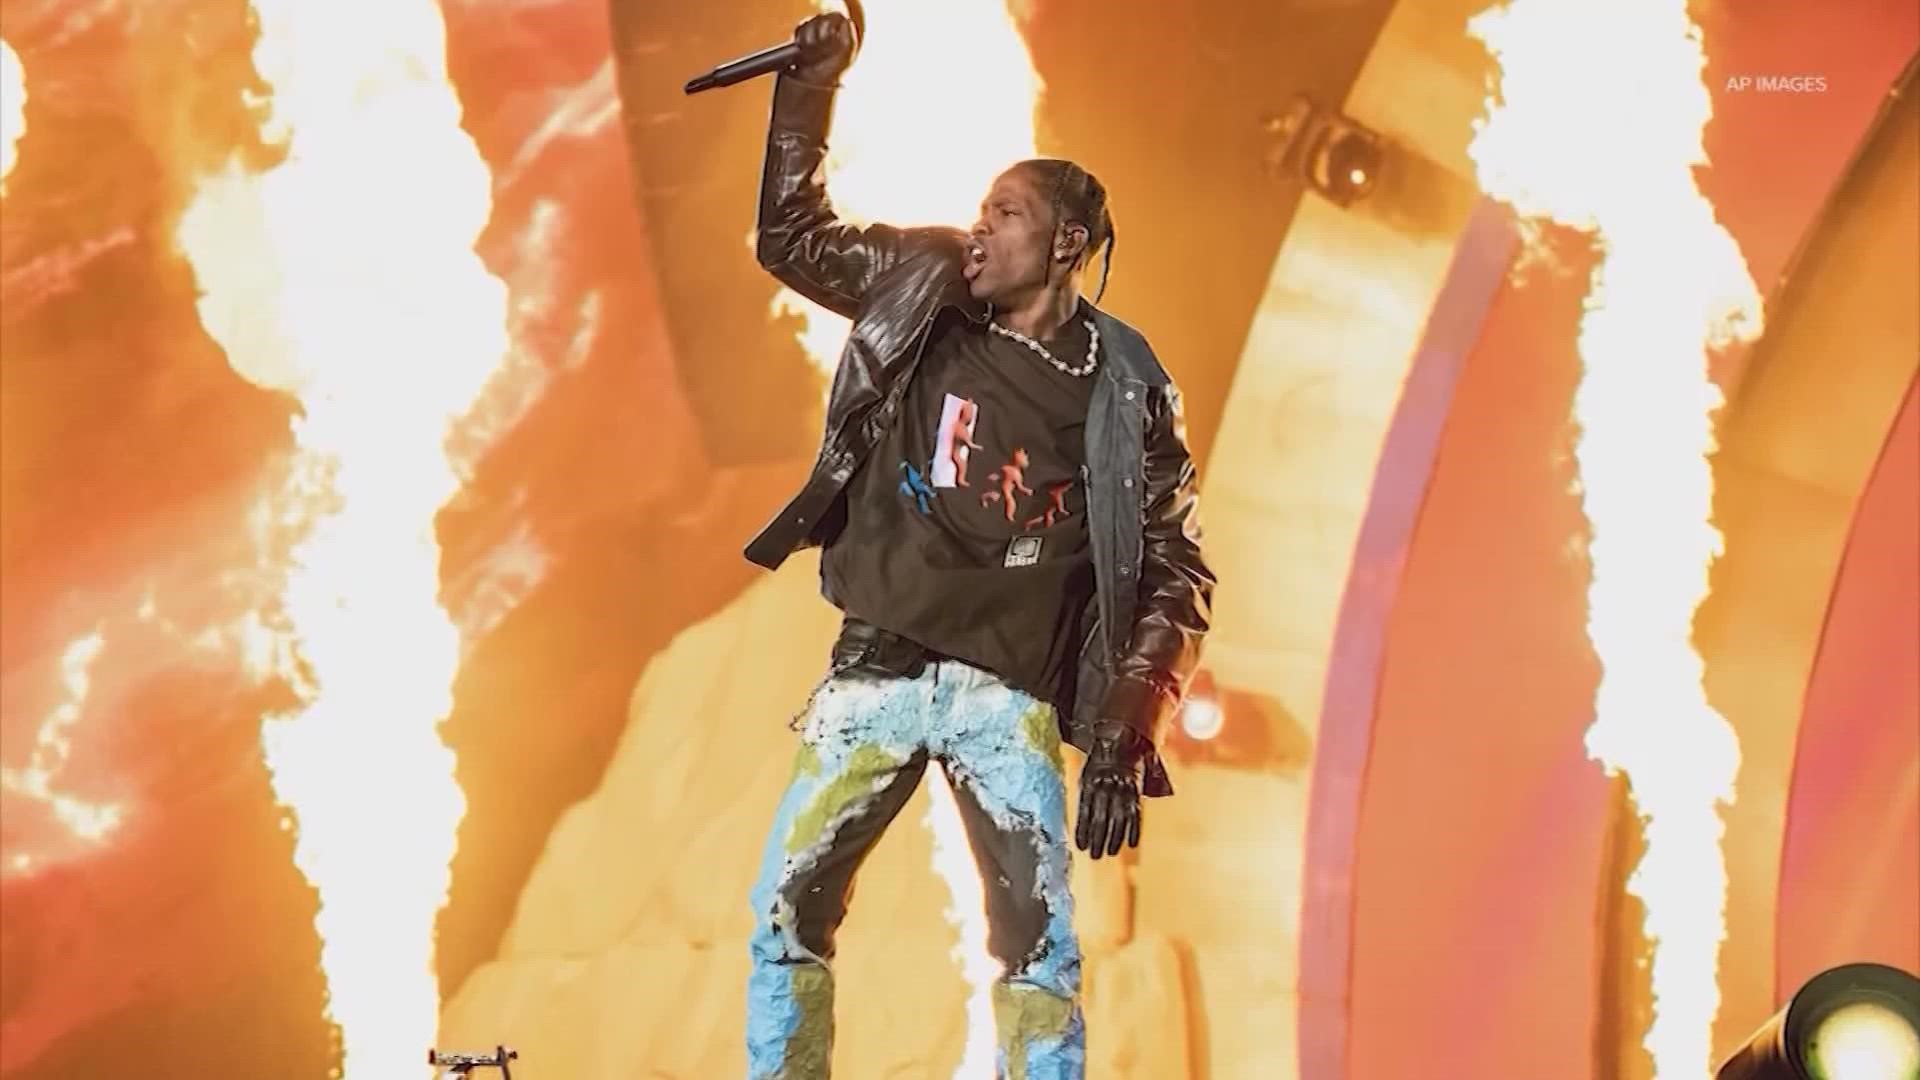 It's been a year since 10 people died when the crowd surged during Travis Scott's concert at the Astroworld Festival.  He's performing in Brazil on the anniversary.